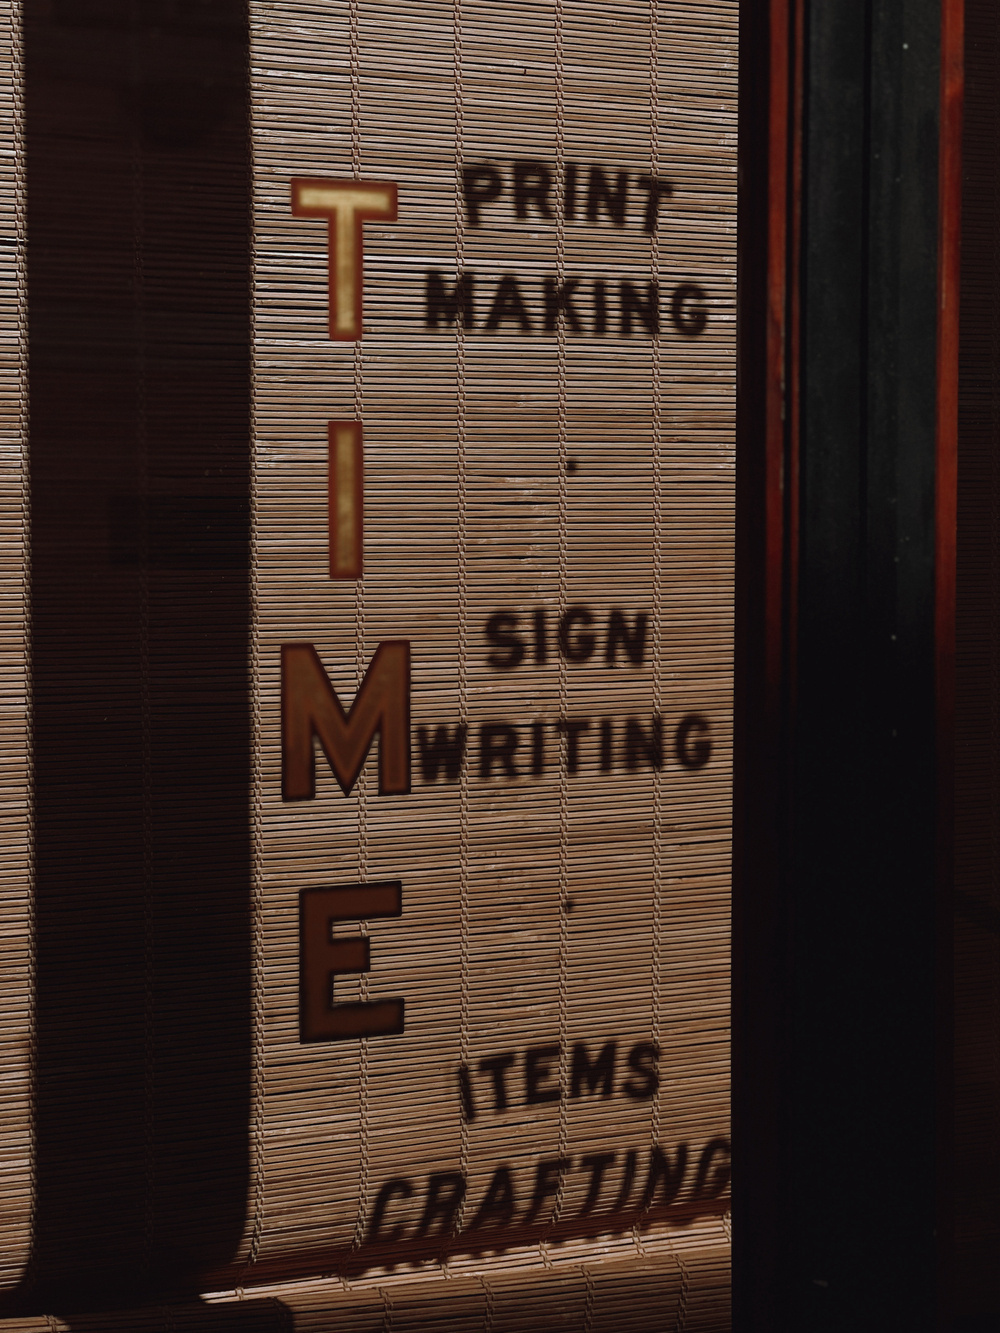 Vertical blinds with sunlight casting shadows. Large, stylized letters spell “TIME,” with smaller text reading “PRINT MAKING,” “SIGN WRITING,” and “ITEMS CRAFTING."